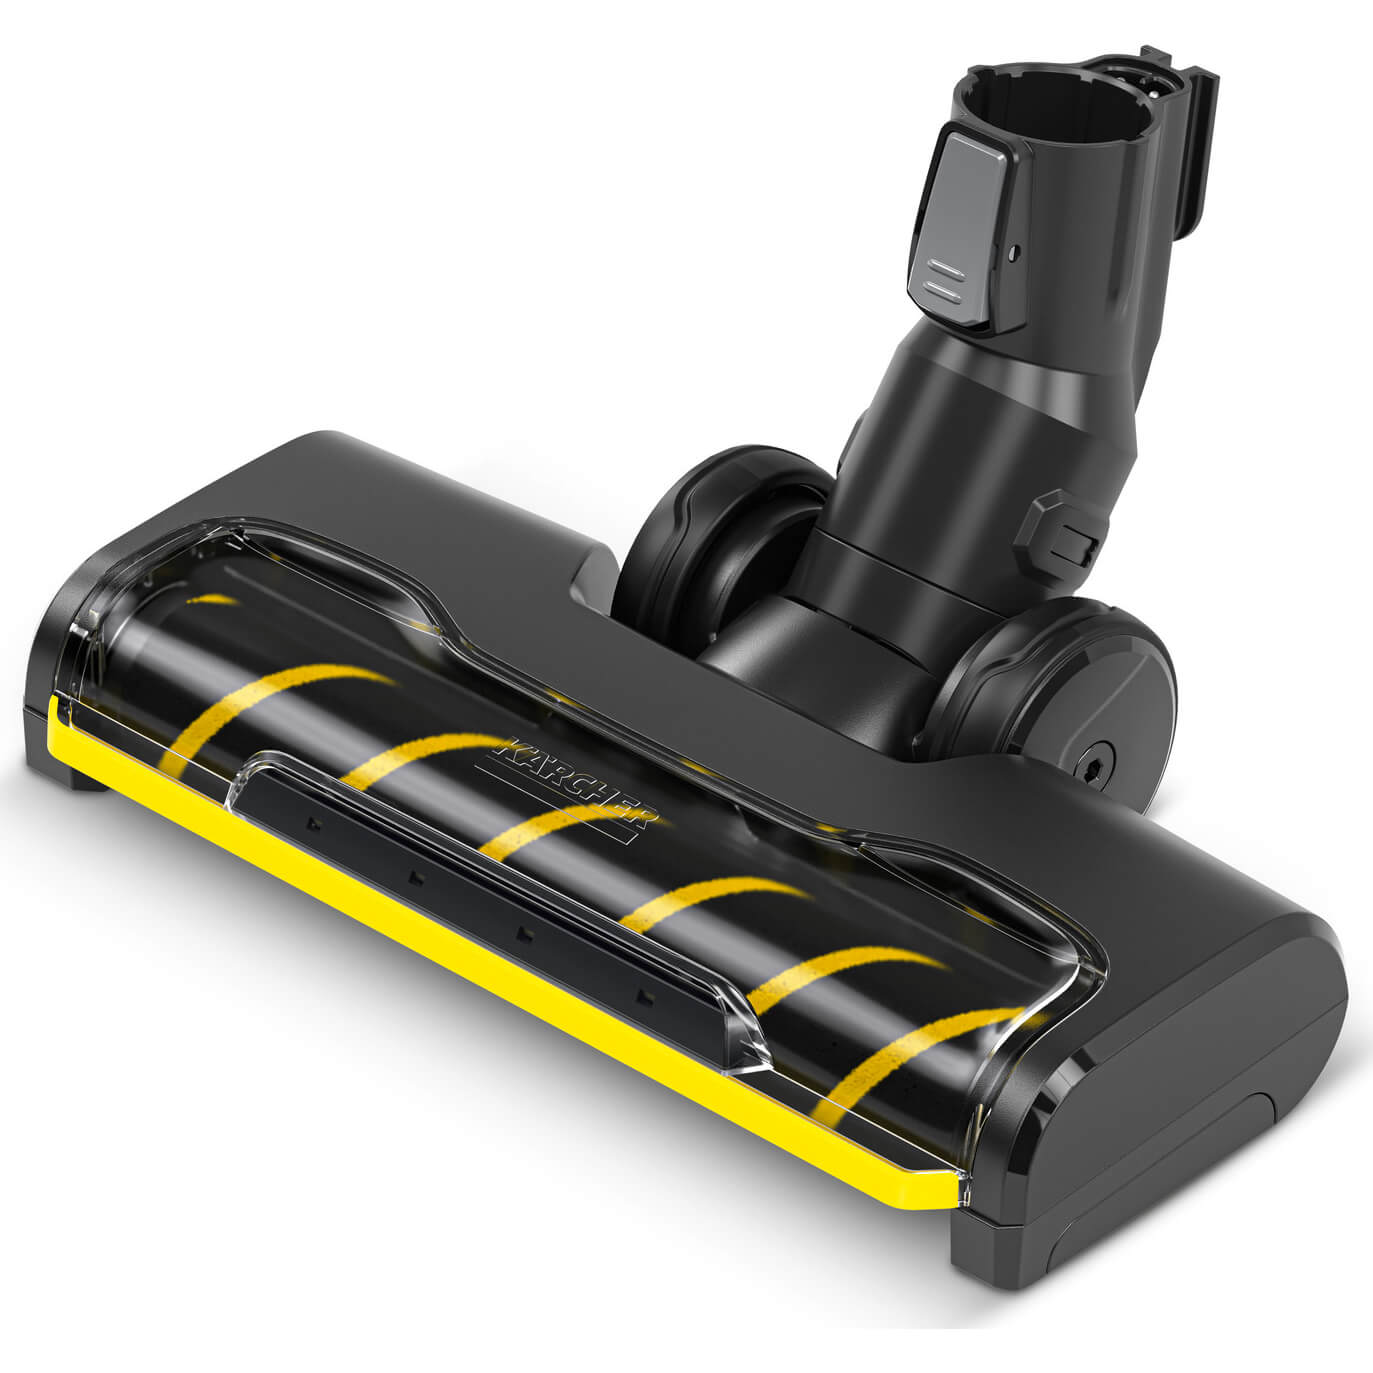 Karcher Hard Floor Nozzle for VC 4, 6 and 7 Cordless Vacuum Cleaners